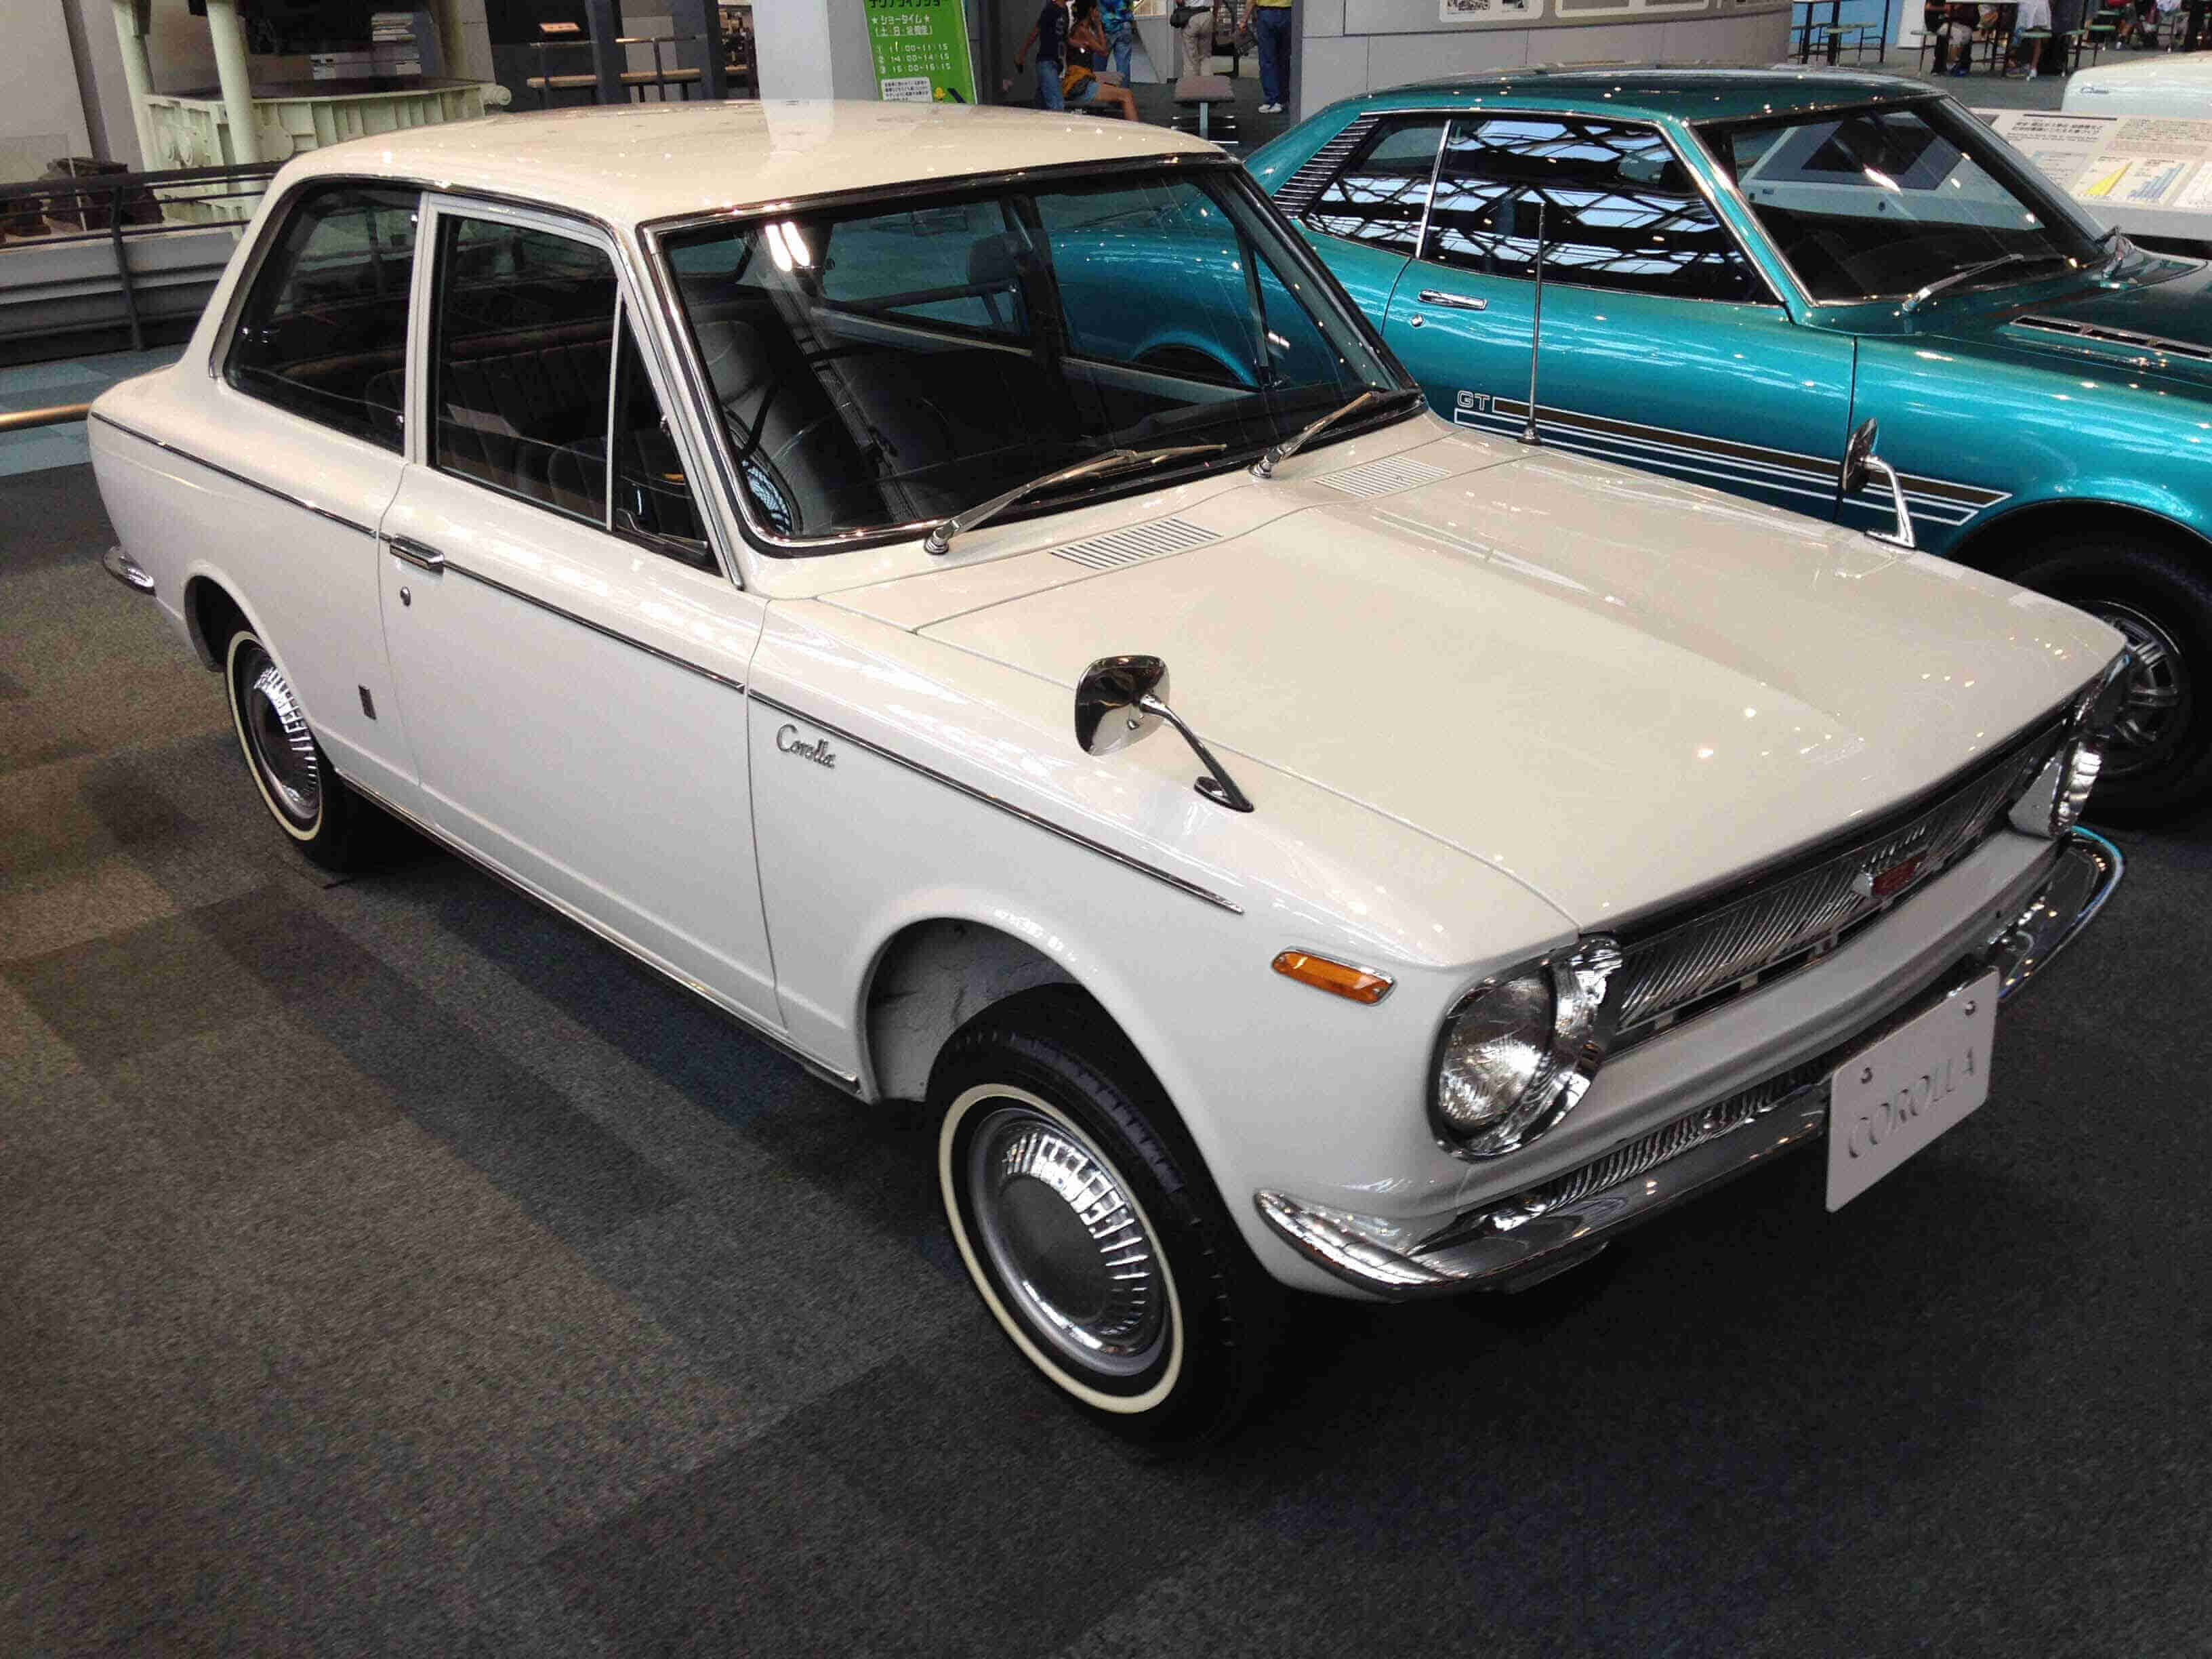 Front, right side view of a white, 1970s style Toyota Corolla, in a parking garage